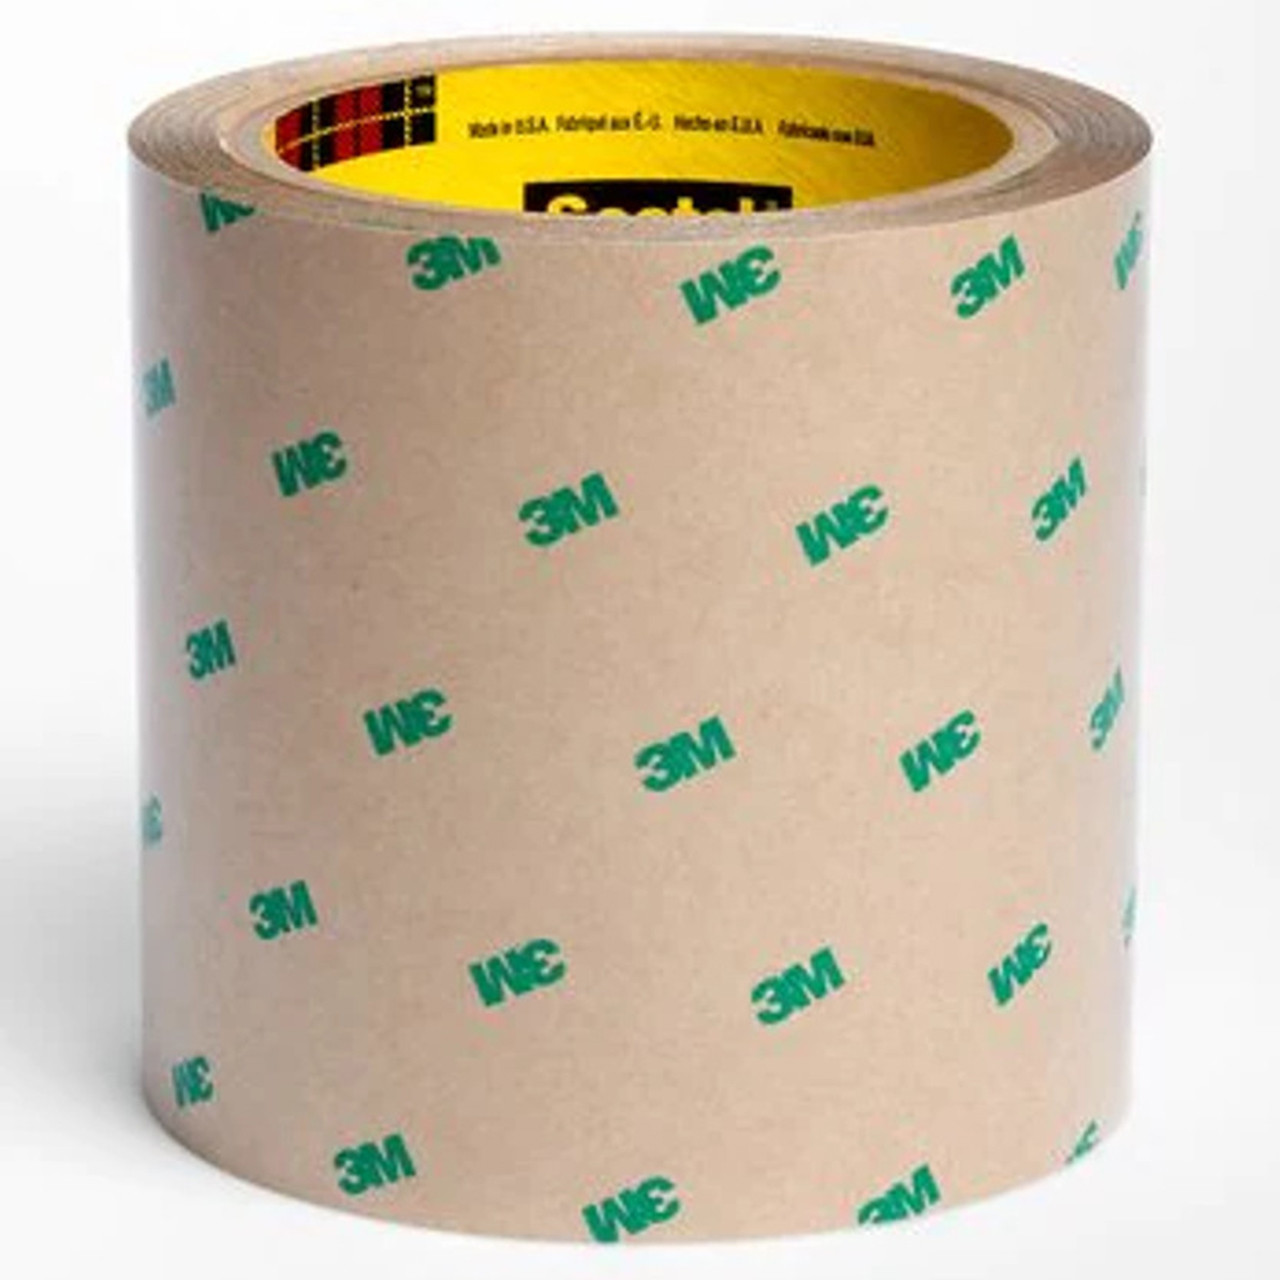 3M 7000143605  180 yd x 54.000 Width Double Sided Tape - All Industrial  Tool Supply